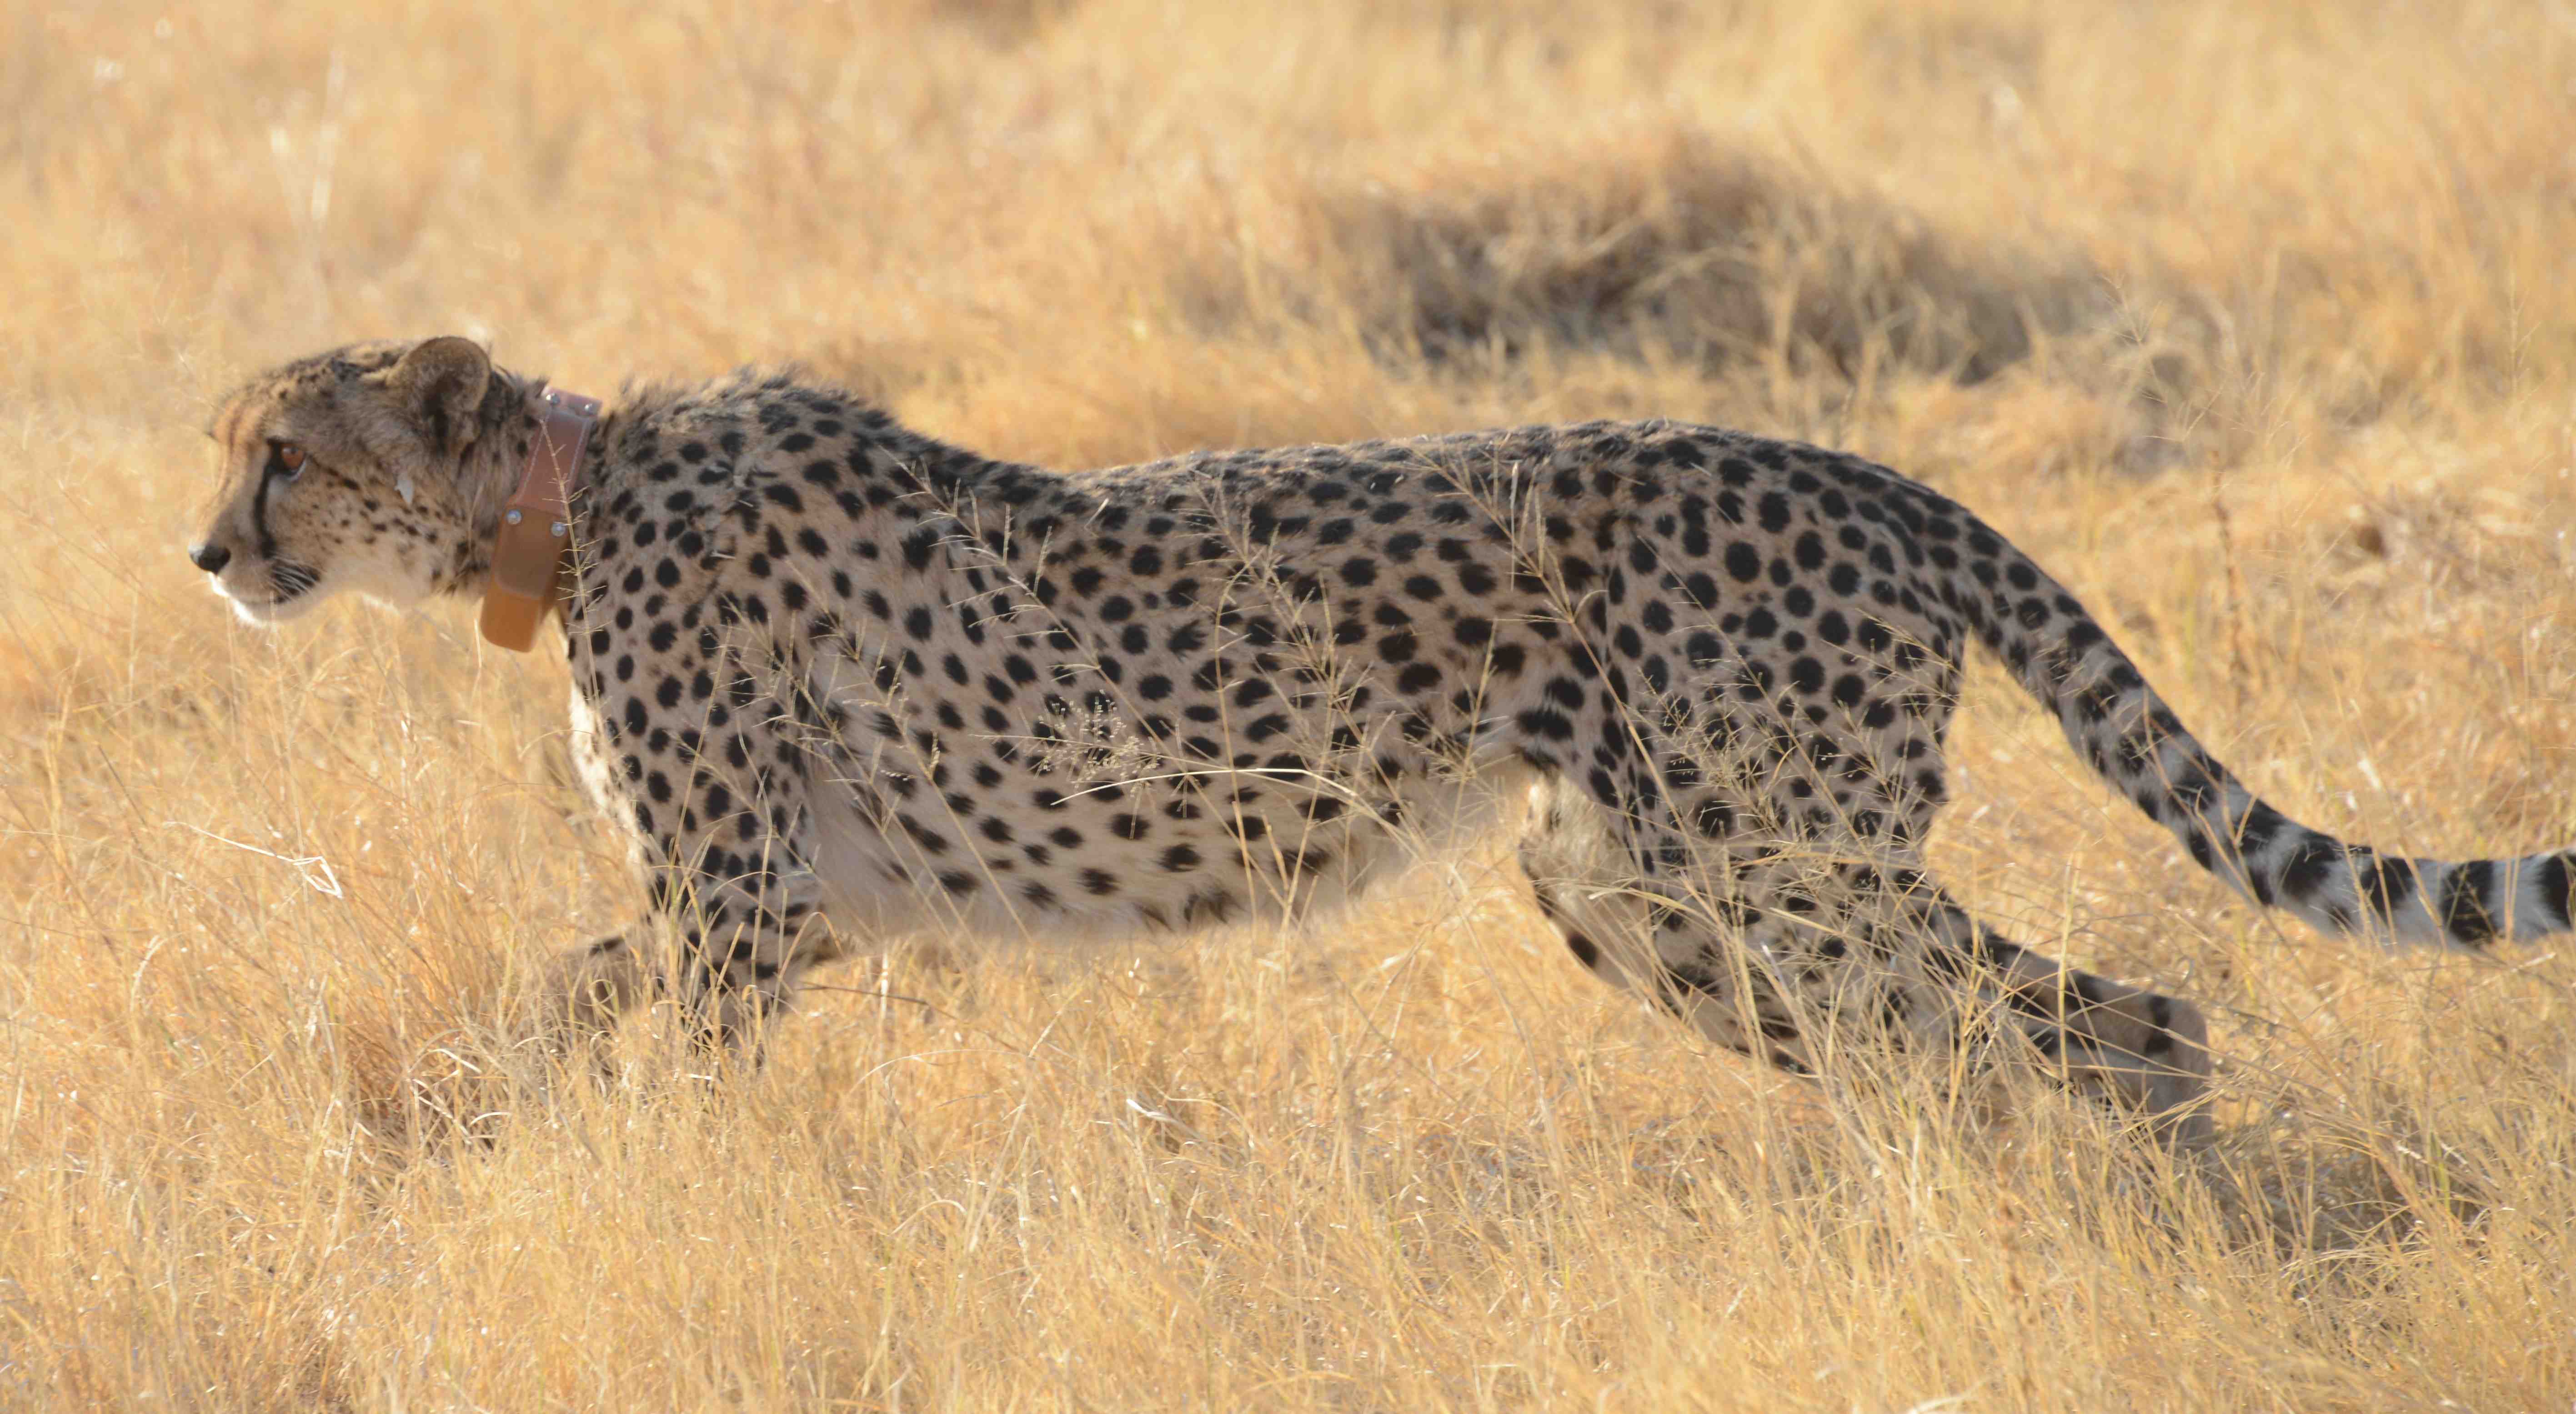 What form of energy is being used when a cheetah runs?